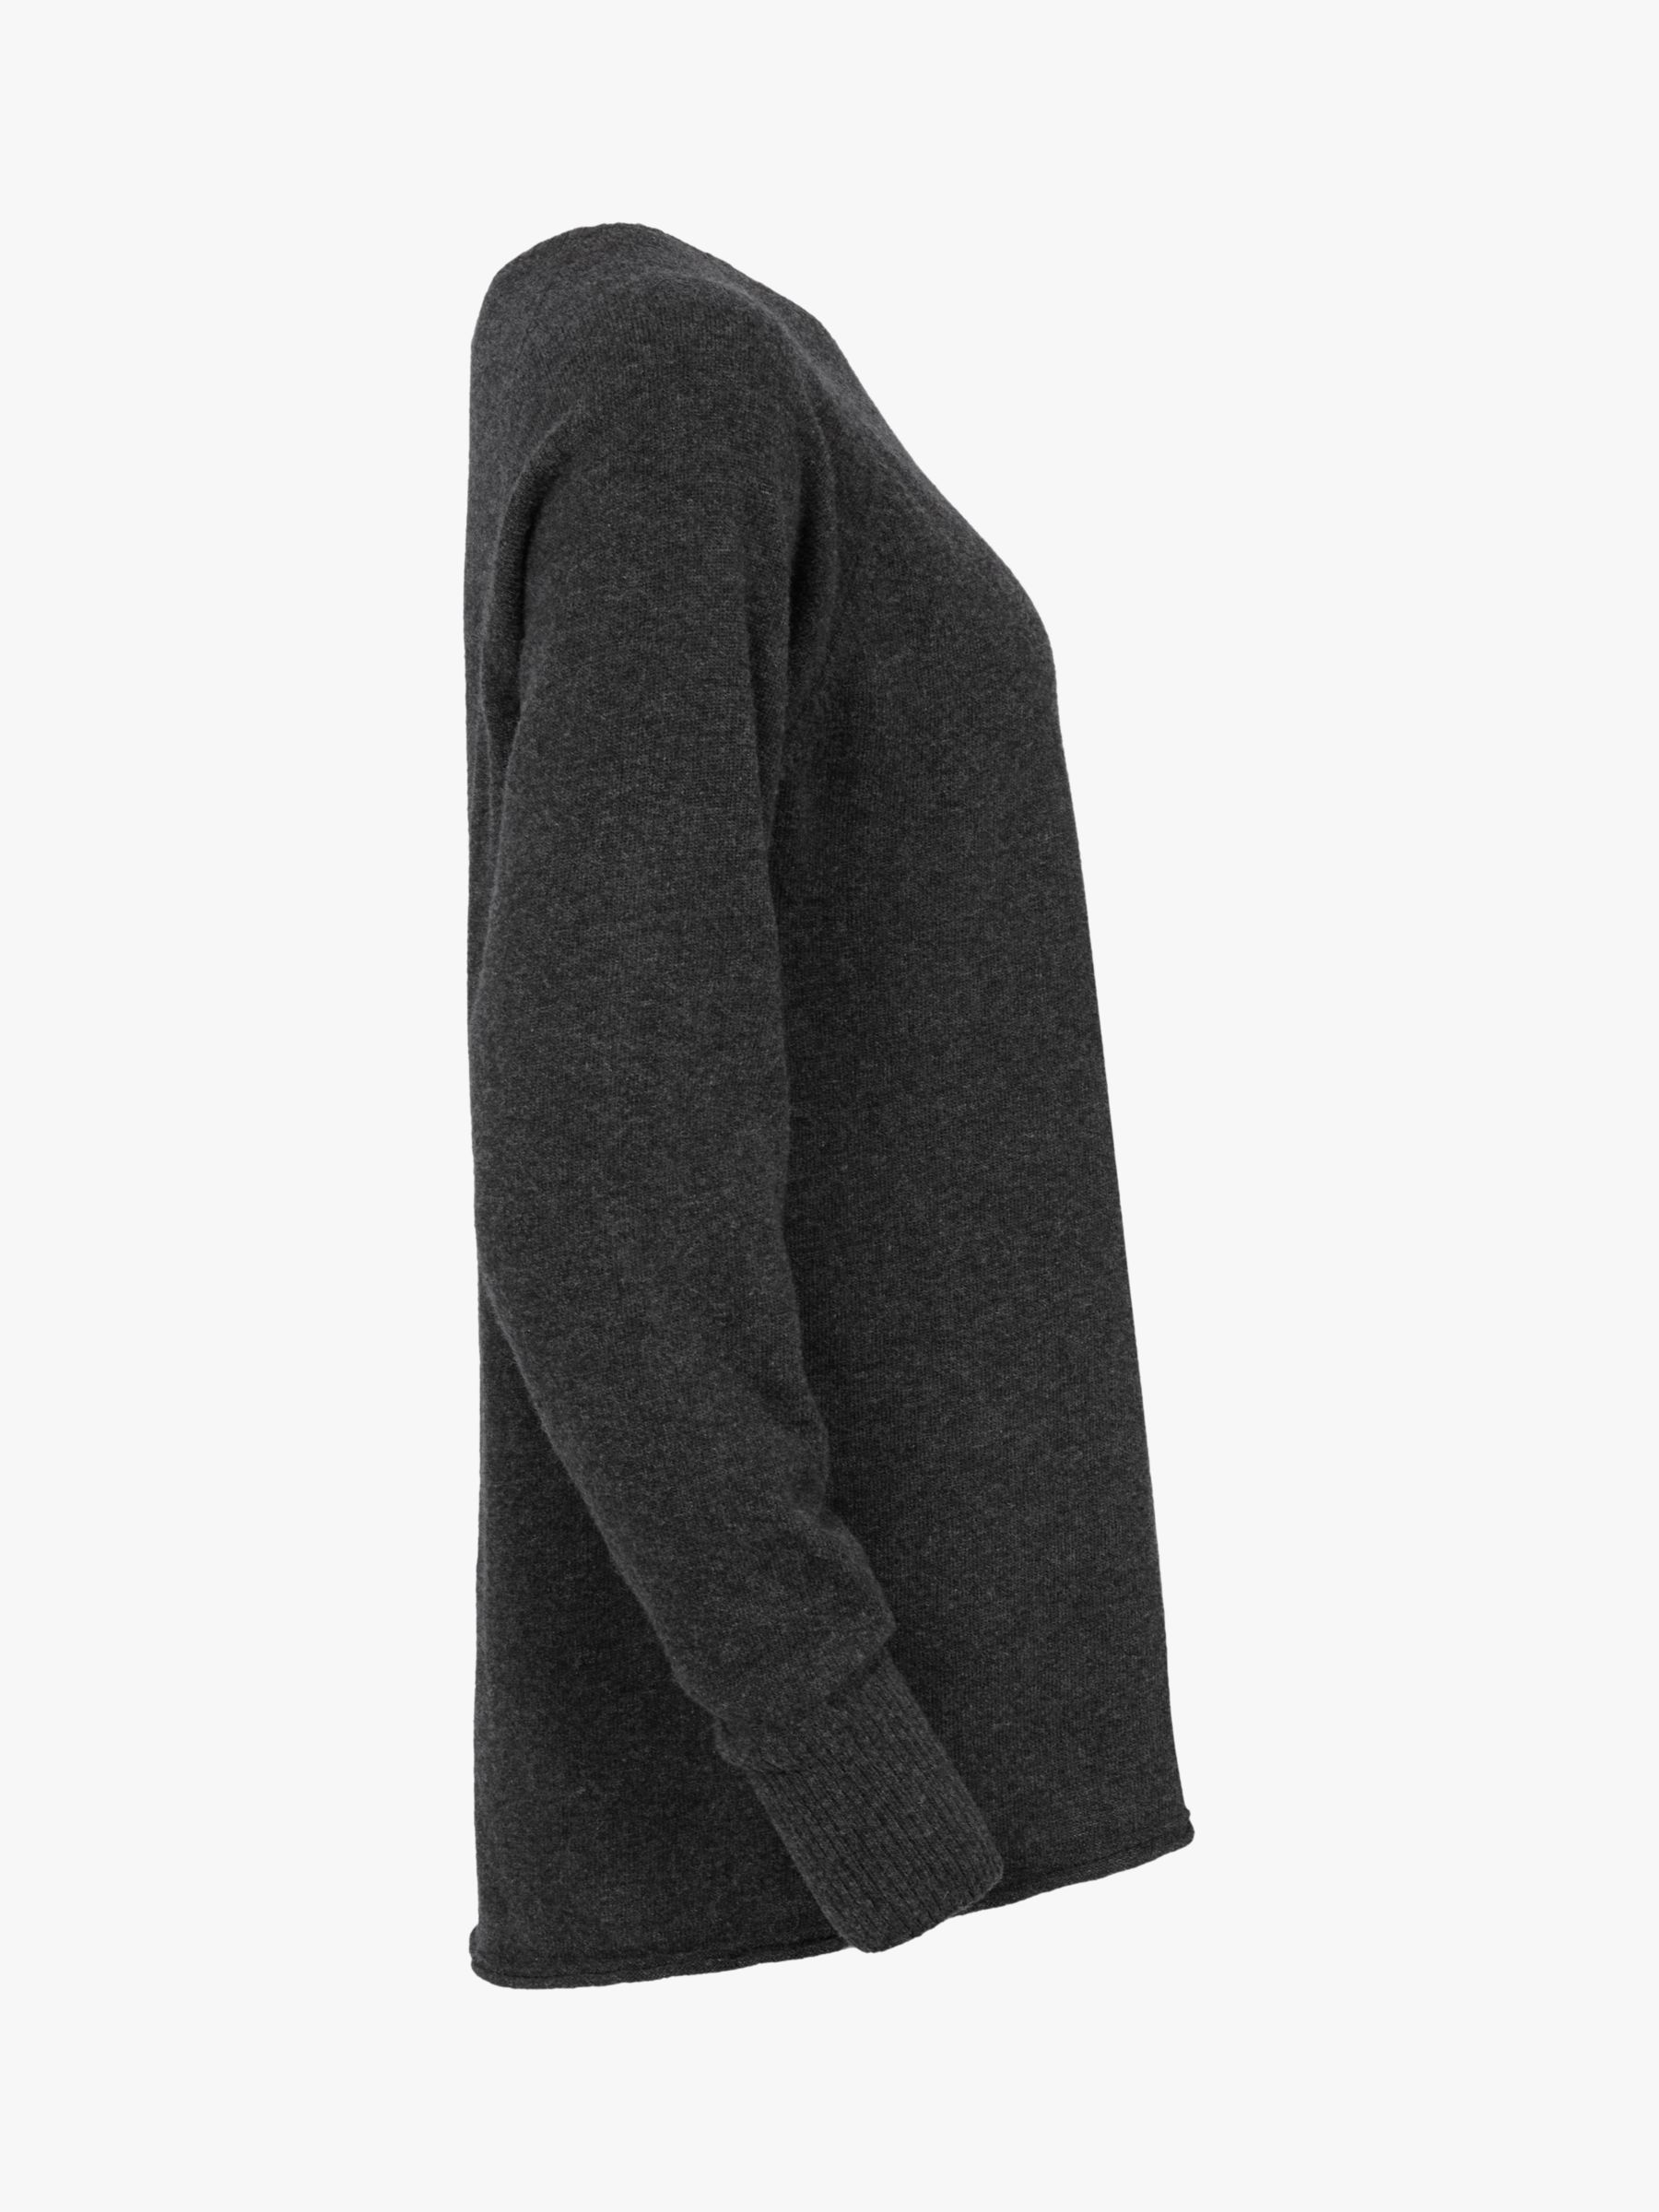 Celtic & Co. Geelong Slouch Crew Neck Jumper, Charcoal at John Lewis ...